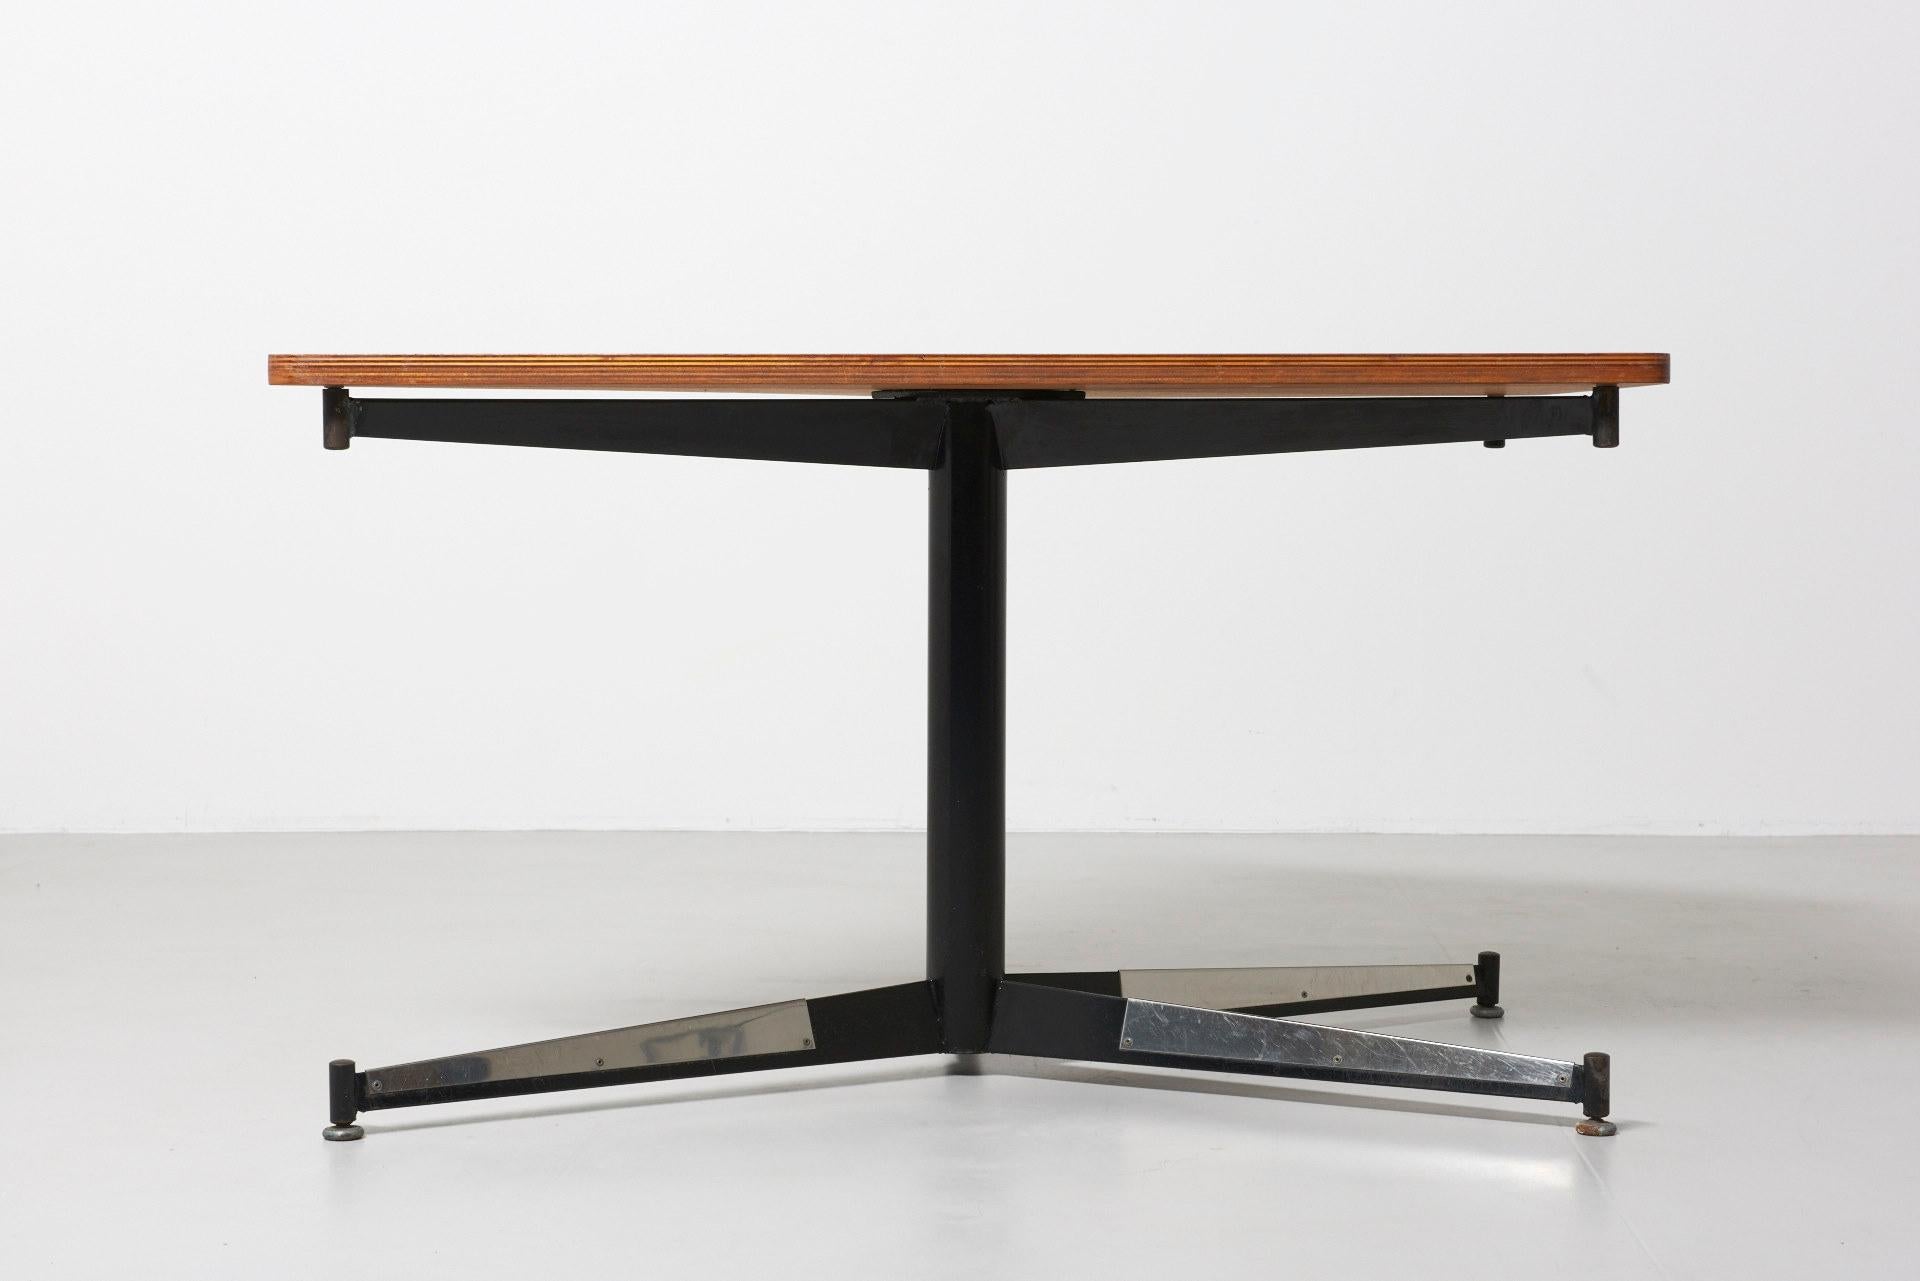 A table designed by Willy Van Der Meeren for the HBK Bank Building in Antwerp. The diamond shaped tabletop is multiplex with walnut veneer, and supported by a black lacquered frame with folded sheets of steel.
The tables were produced in the 1960s